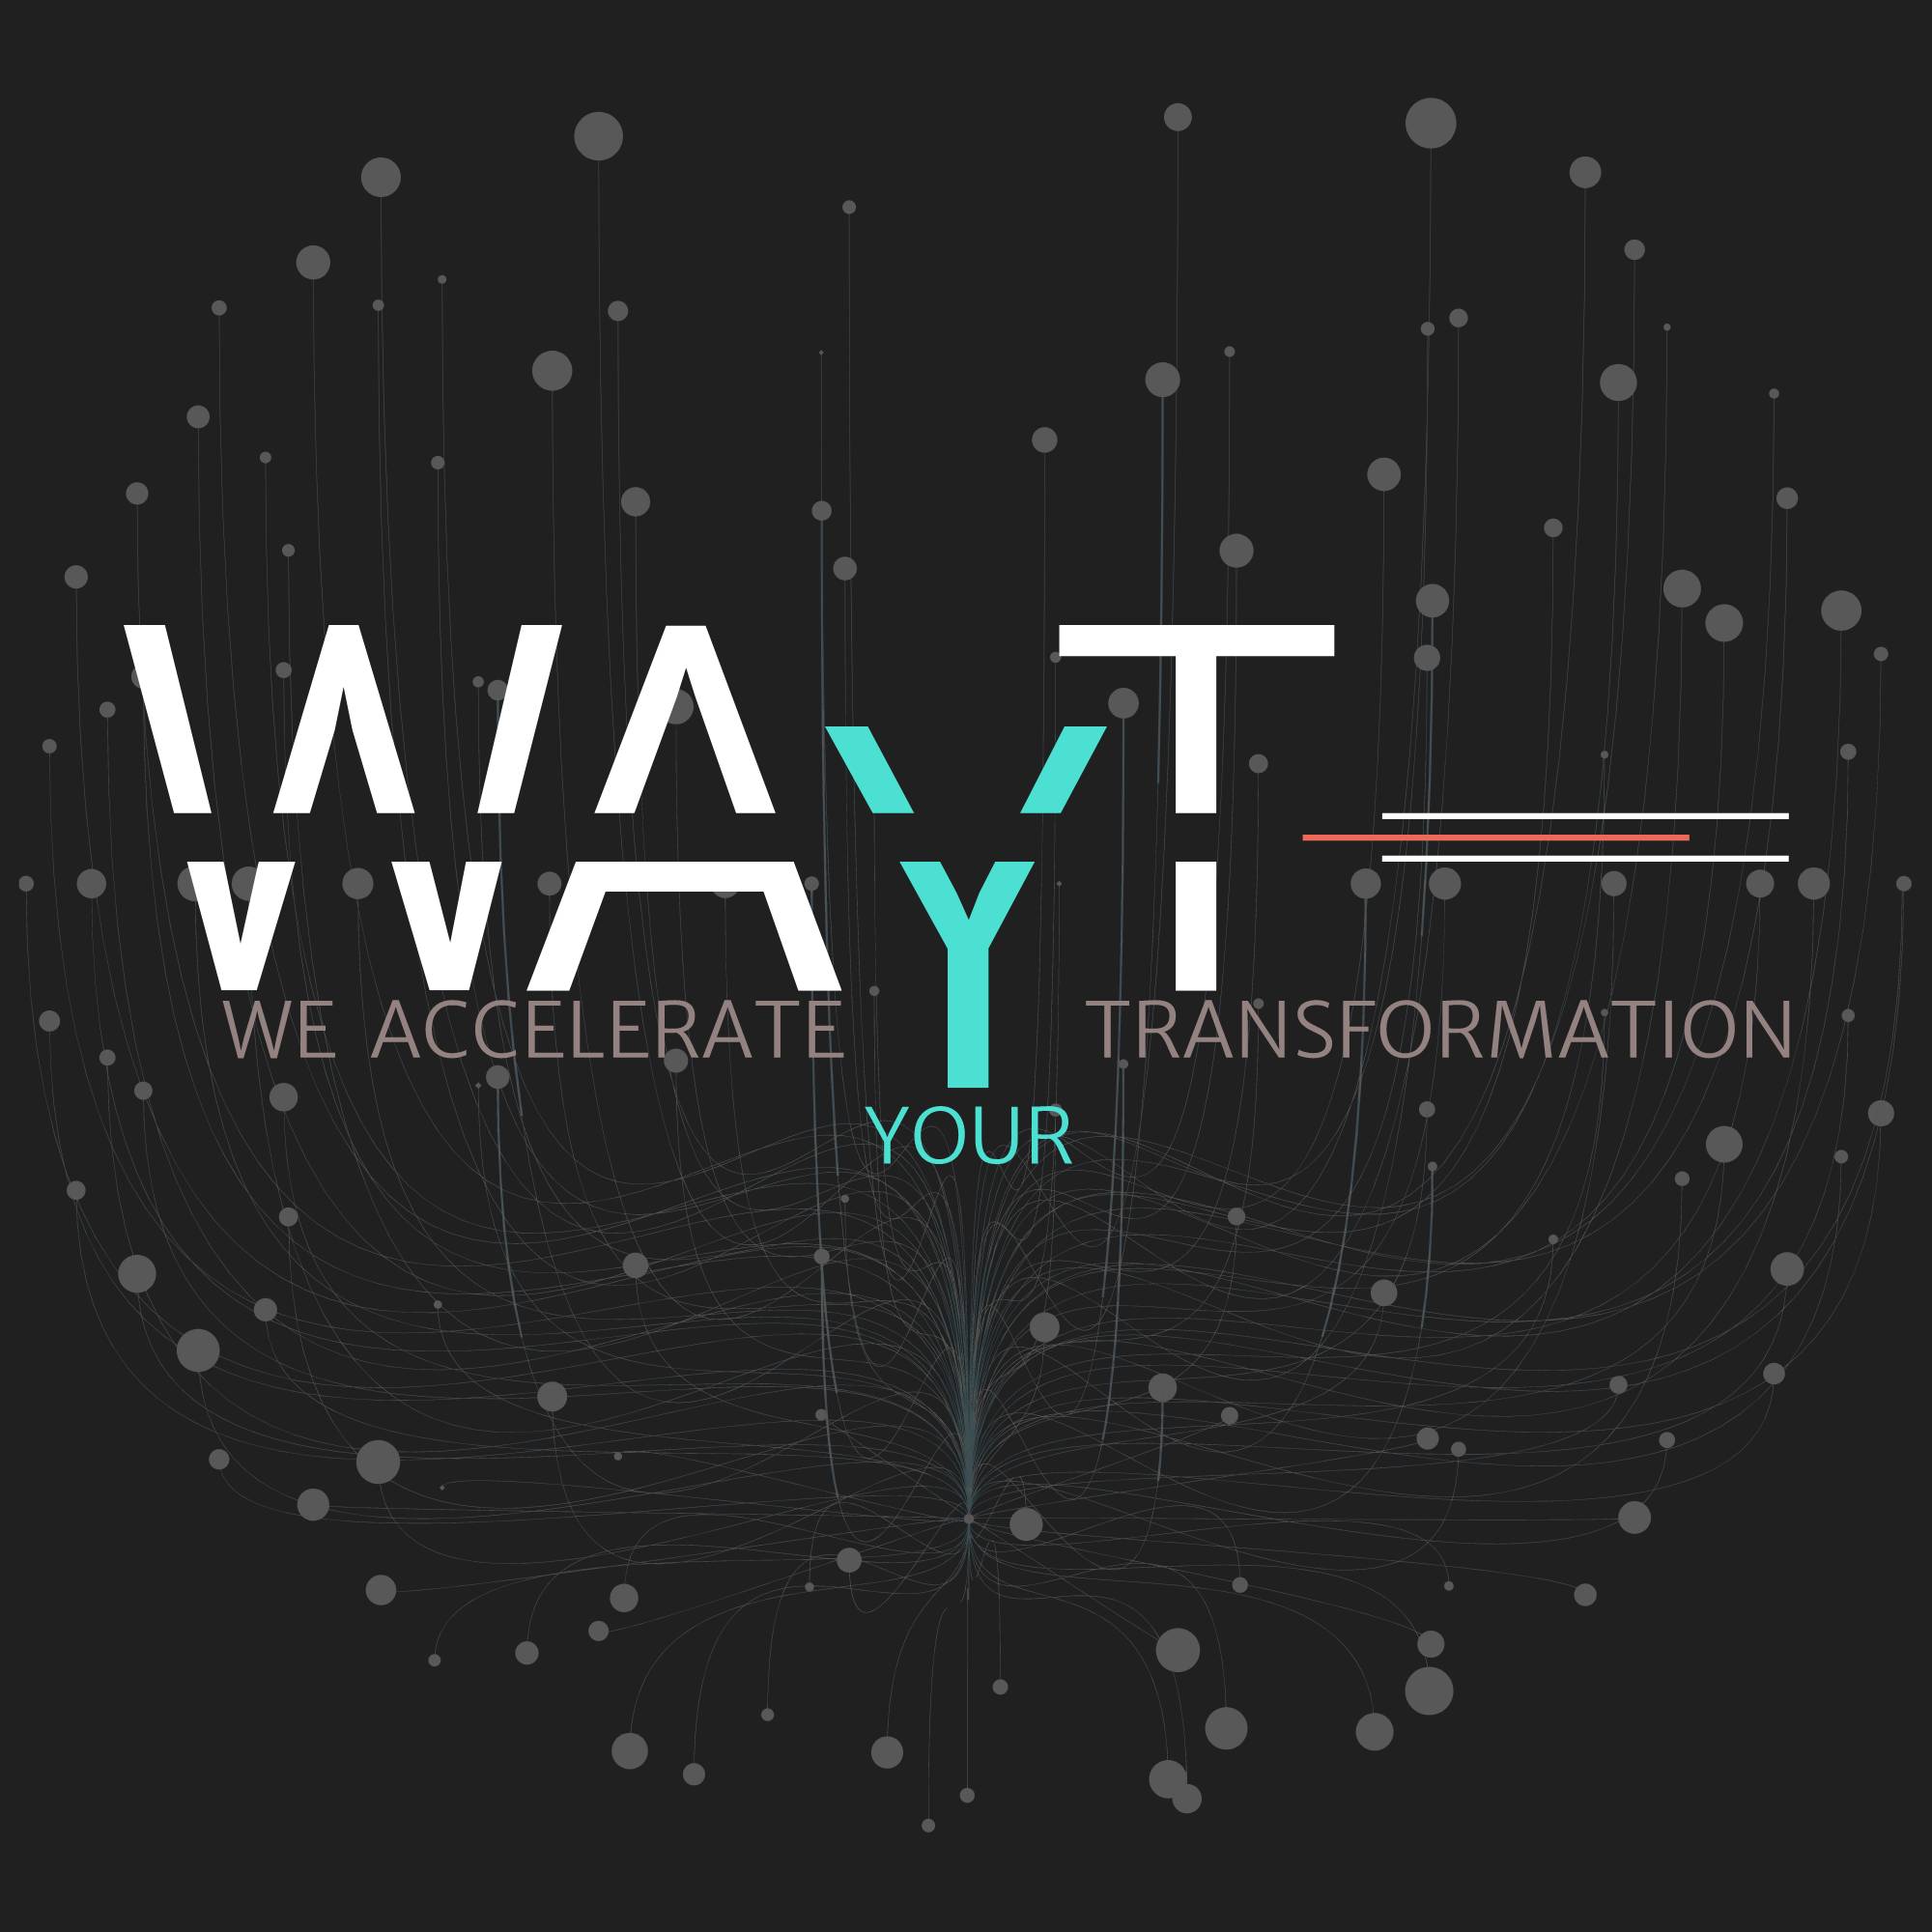 WAYT - We Accelerate Your Transformation